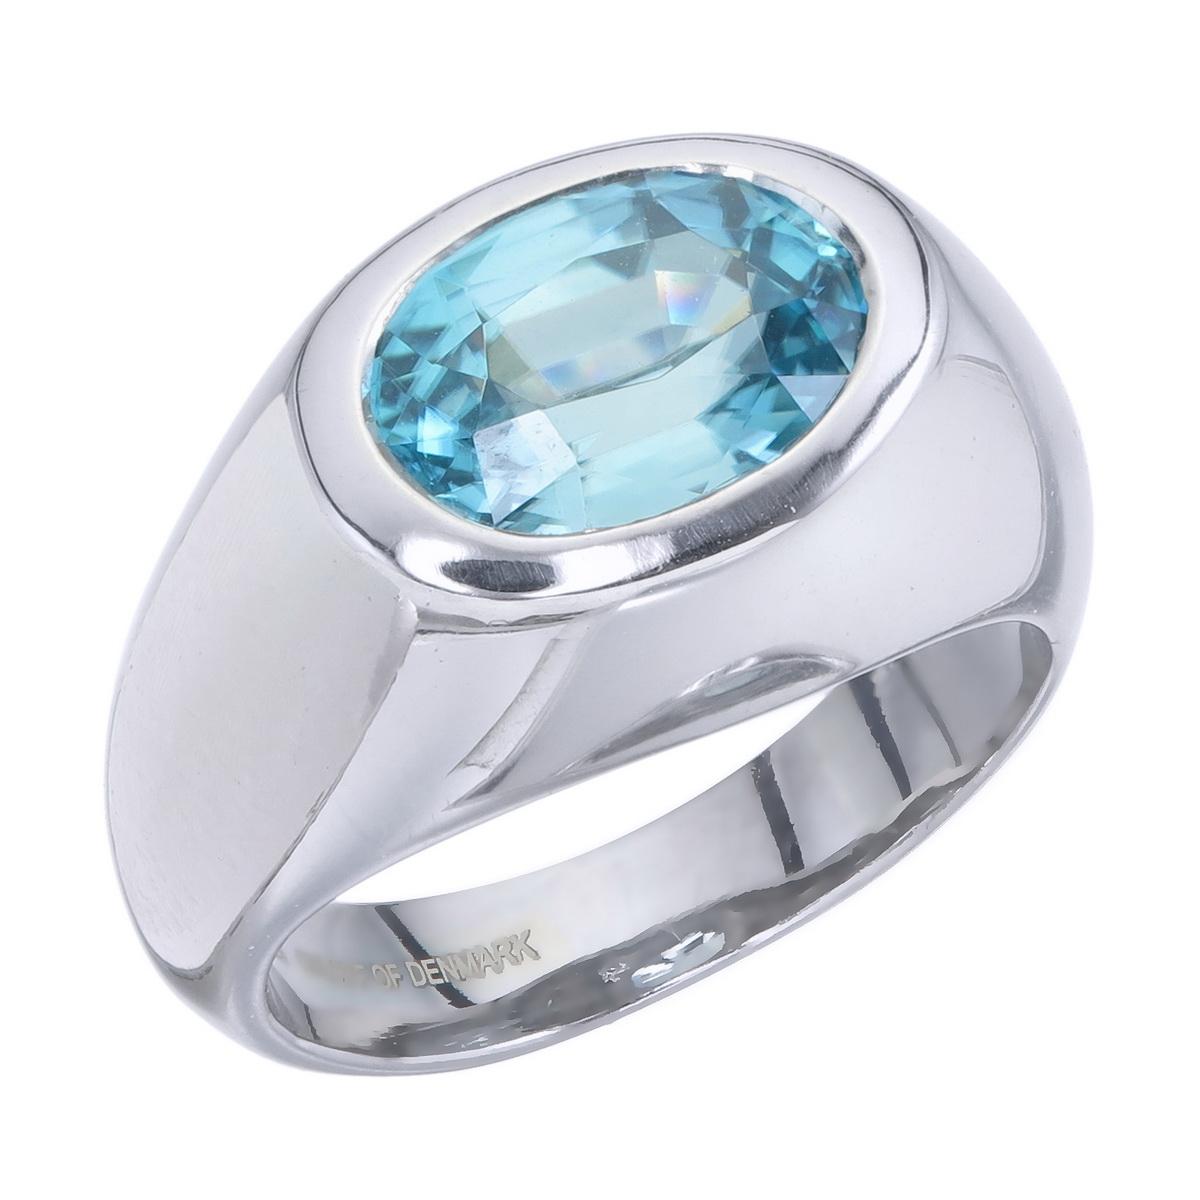 Orloff of Denmark; 4.52 carat Metallic Blue Zircon set in a Solitaire 925 Sterling Silver Ring.

Featured on this peace is a natural blue zircon mined in Ratanakiri, Cambodia and later re-cut in Bangkok, Thailand.
The unique blue of the zircon